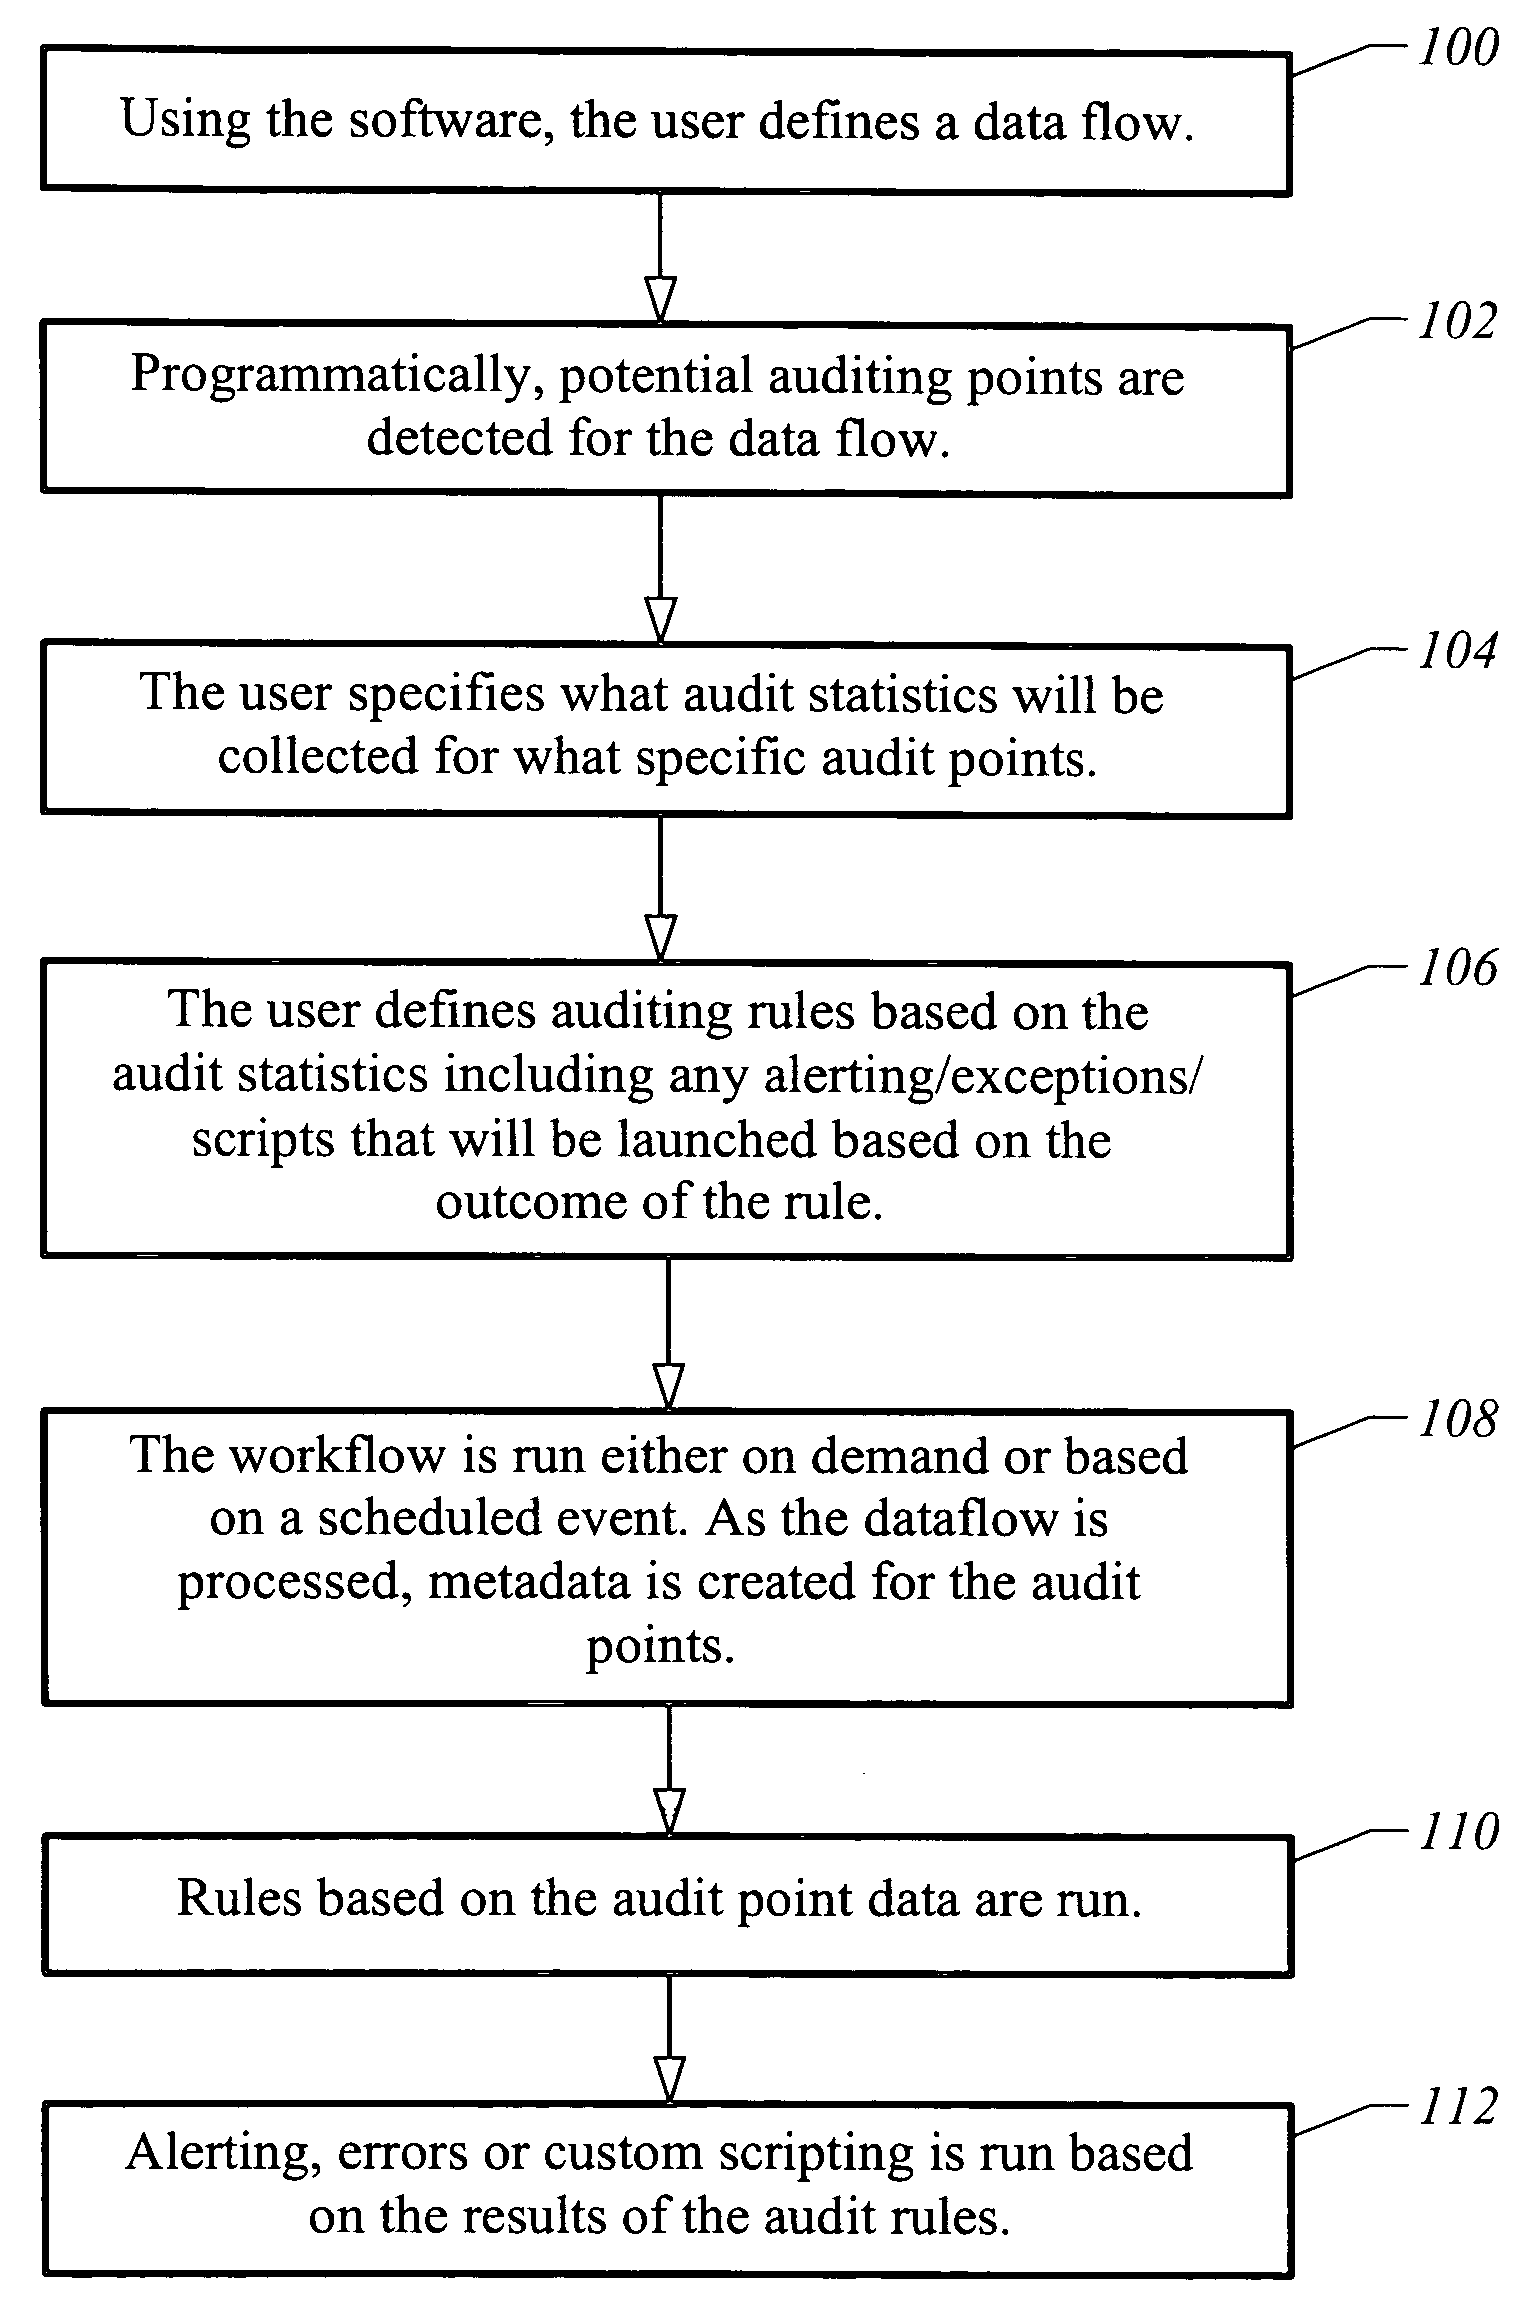 Apparatus and method for dynamically auditing data migration to produce metadata